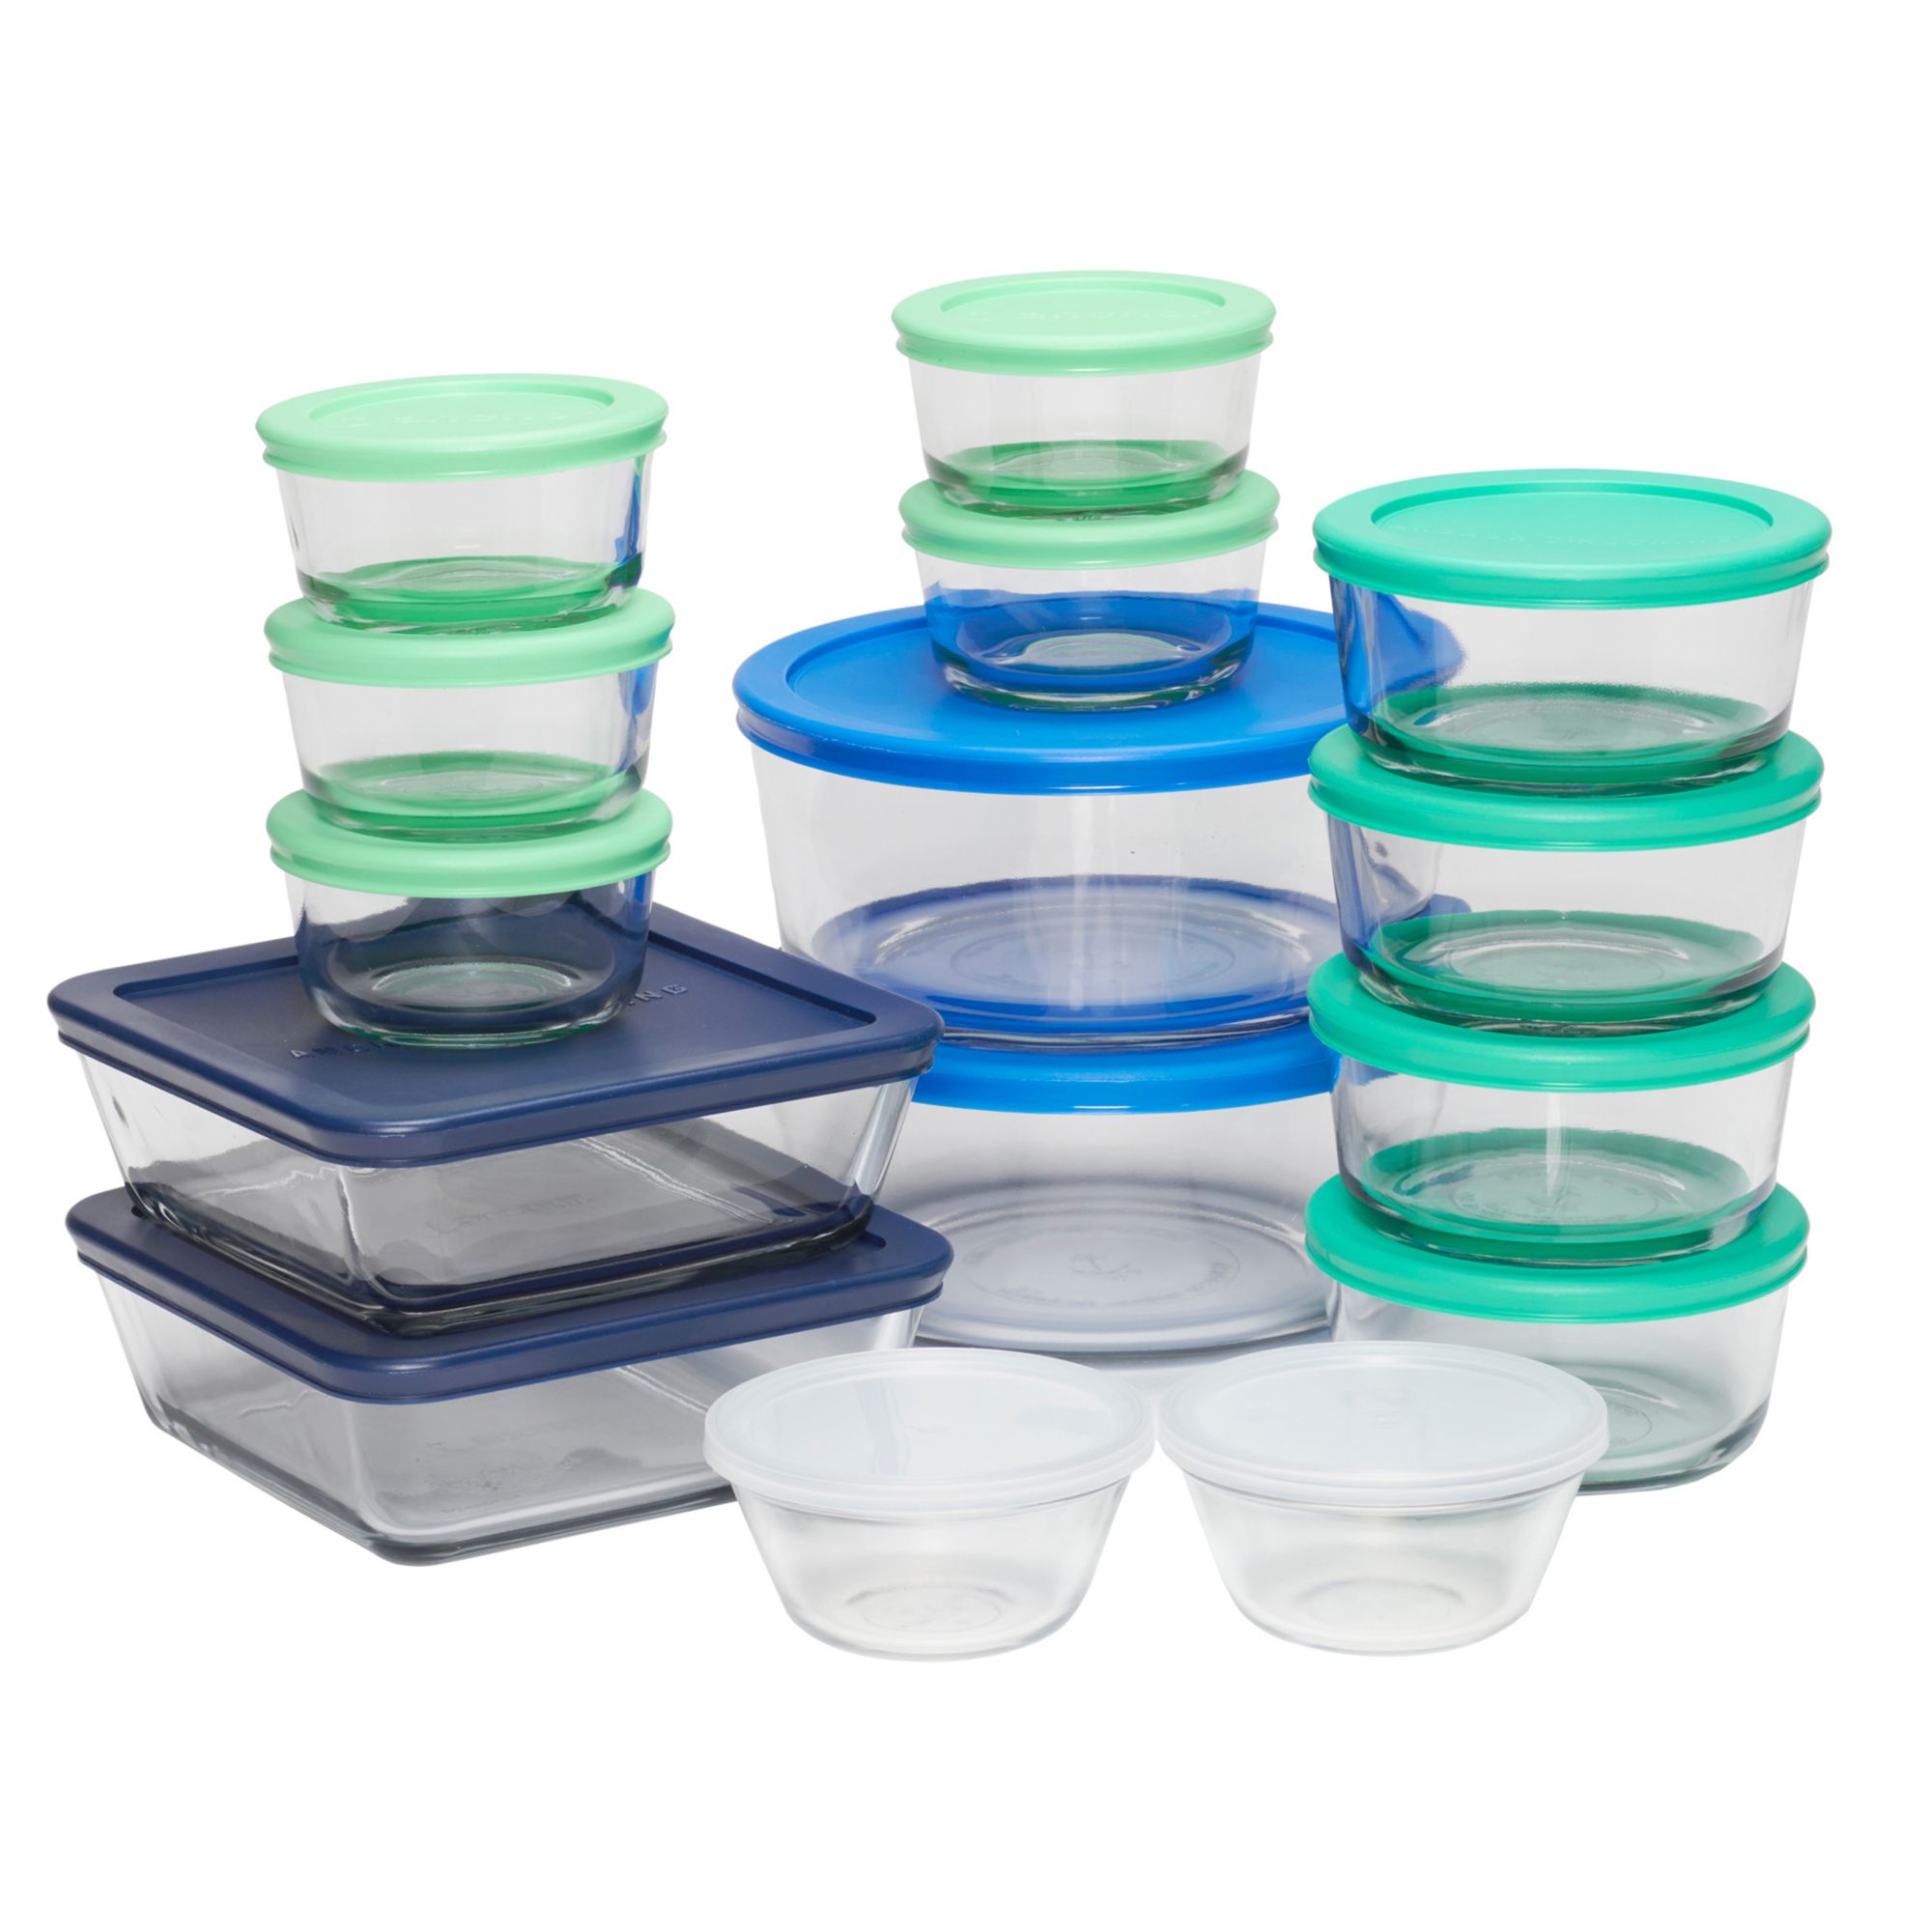 Simply Store 2-Cup Glass Food Storage Container, Round, Set of 3